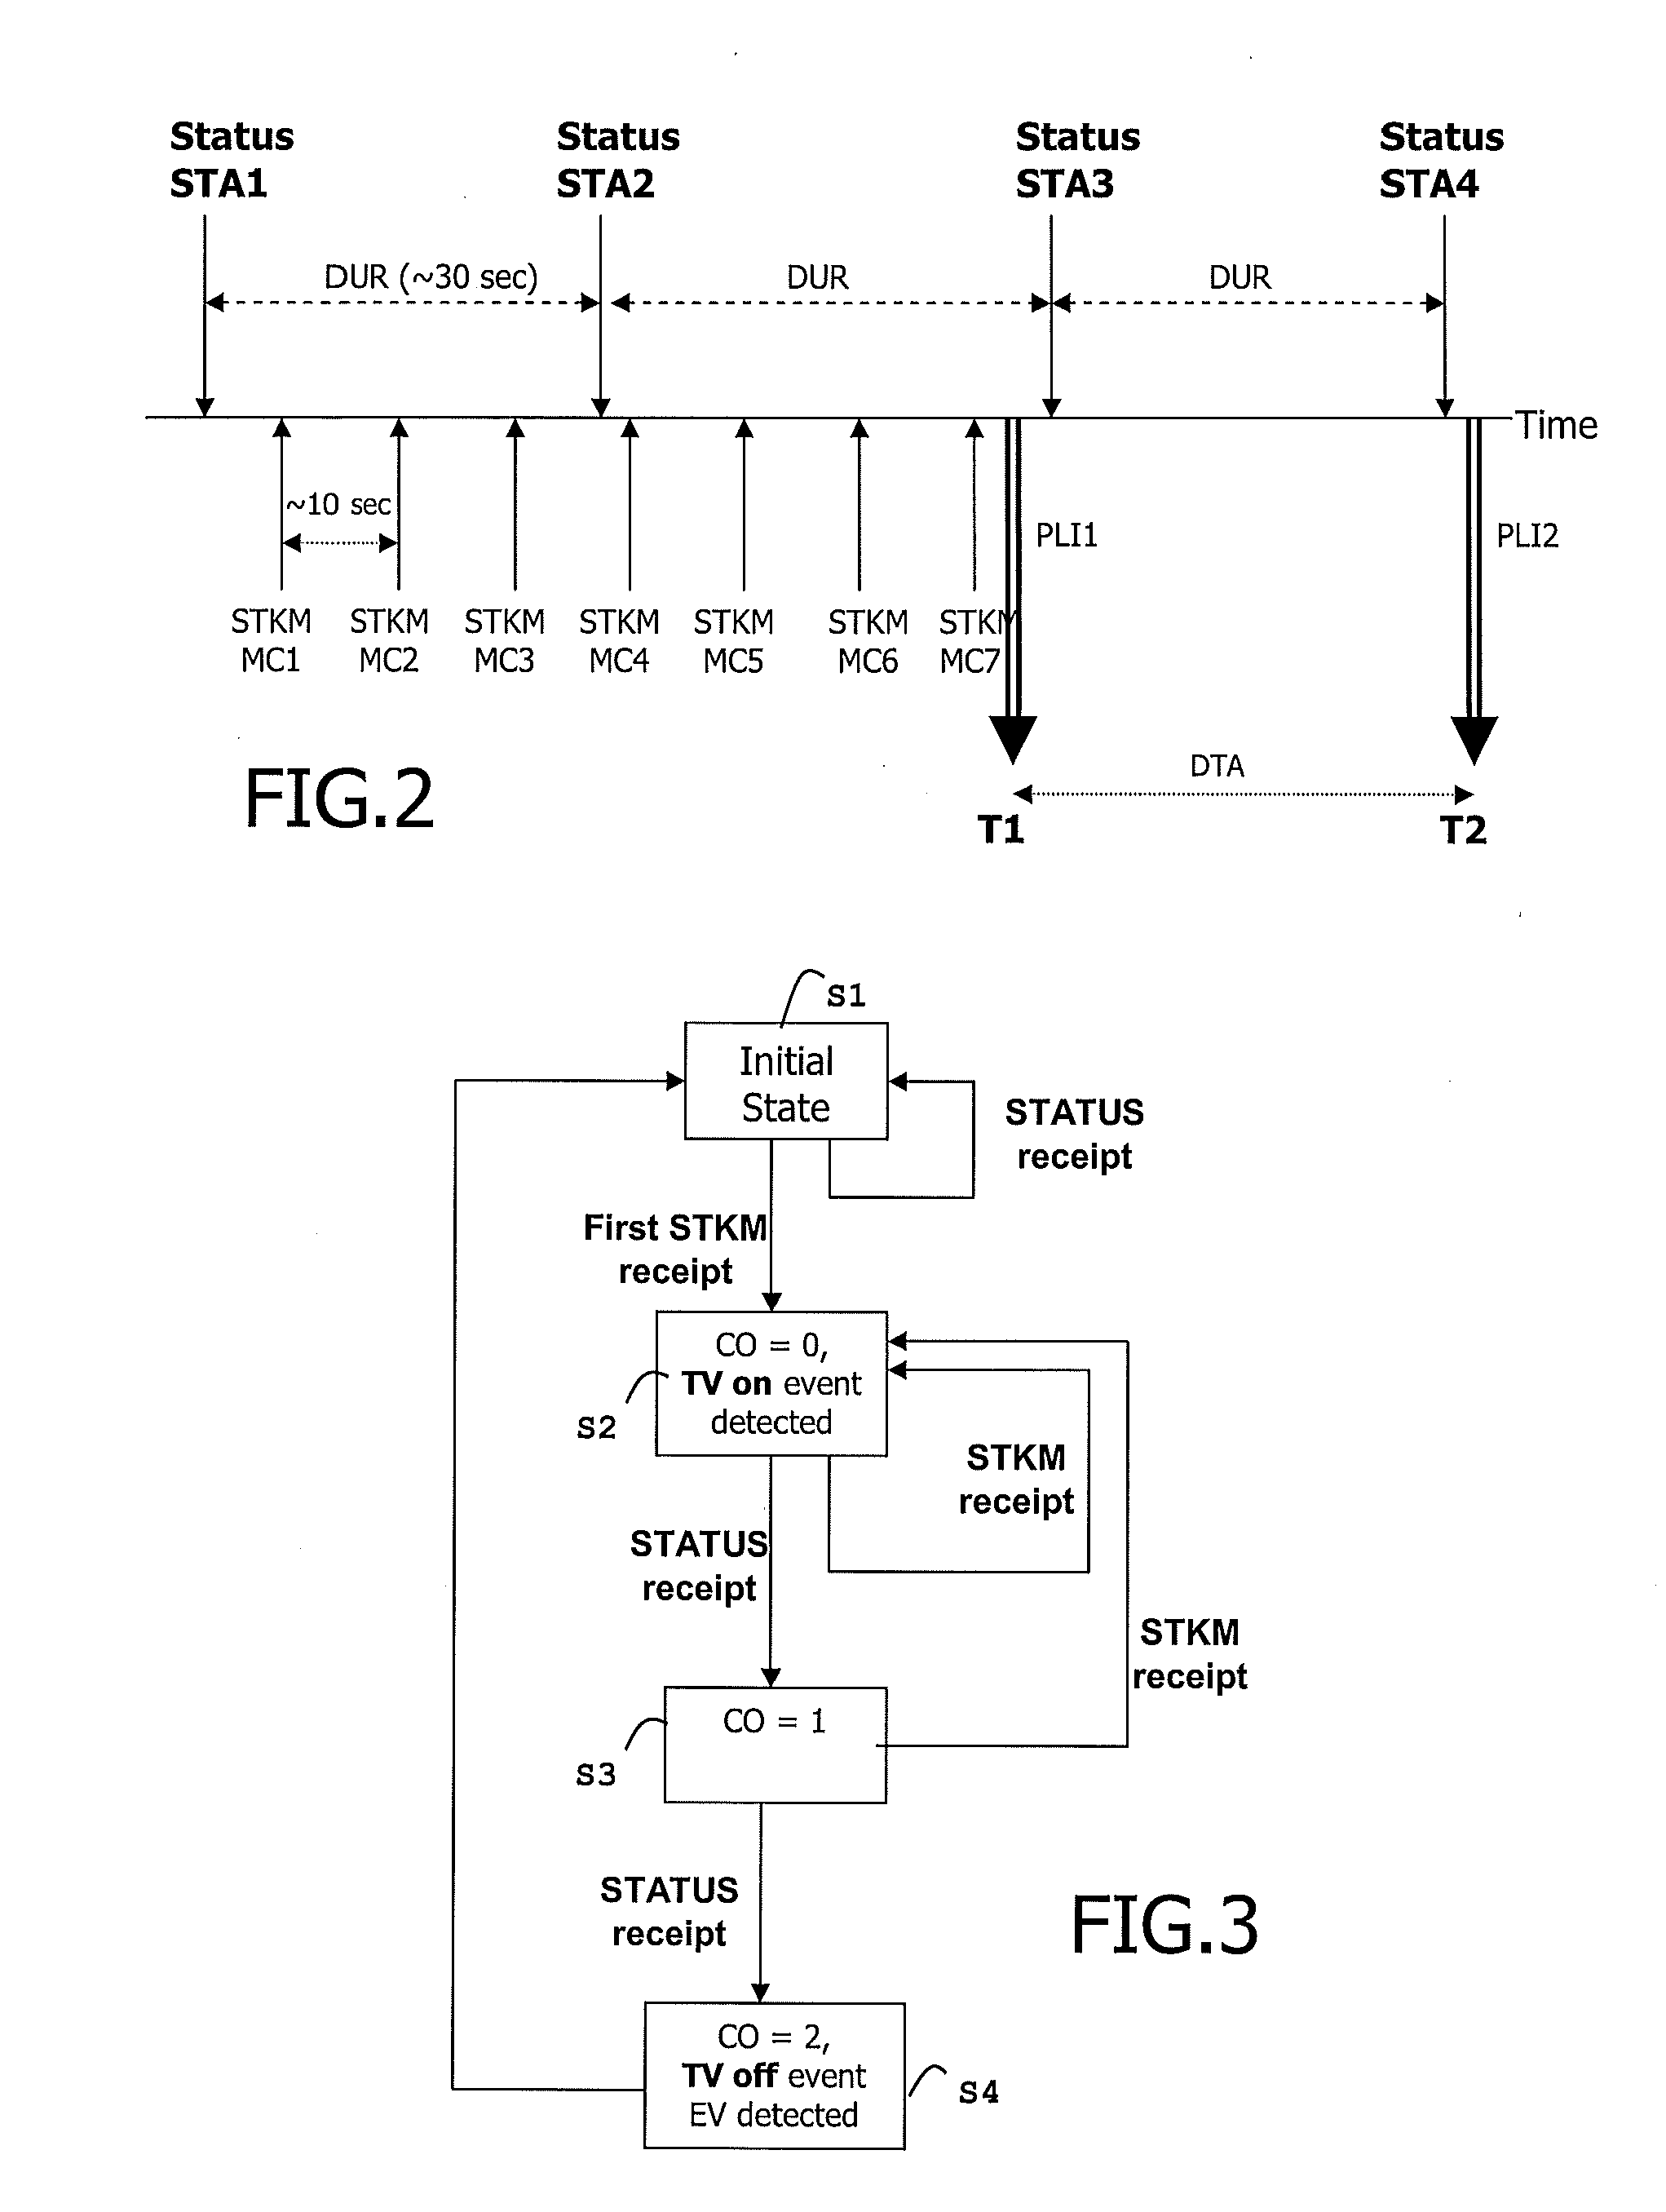 Method of detecting TV off event on a mobile terminal equipment